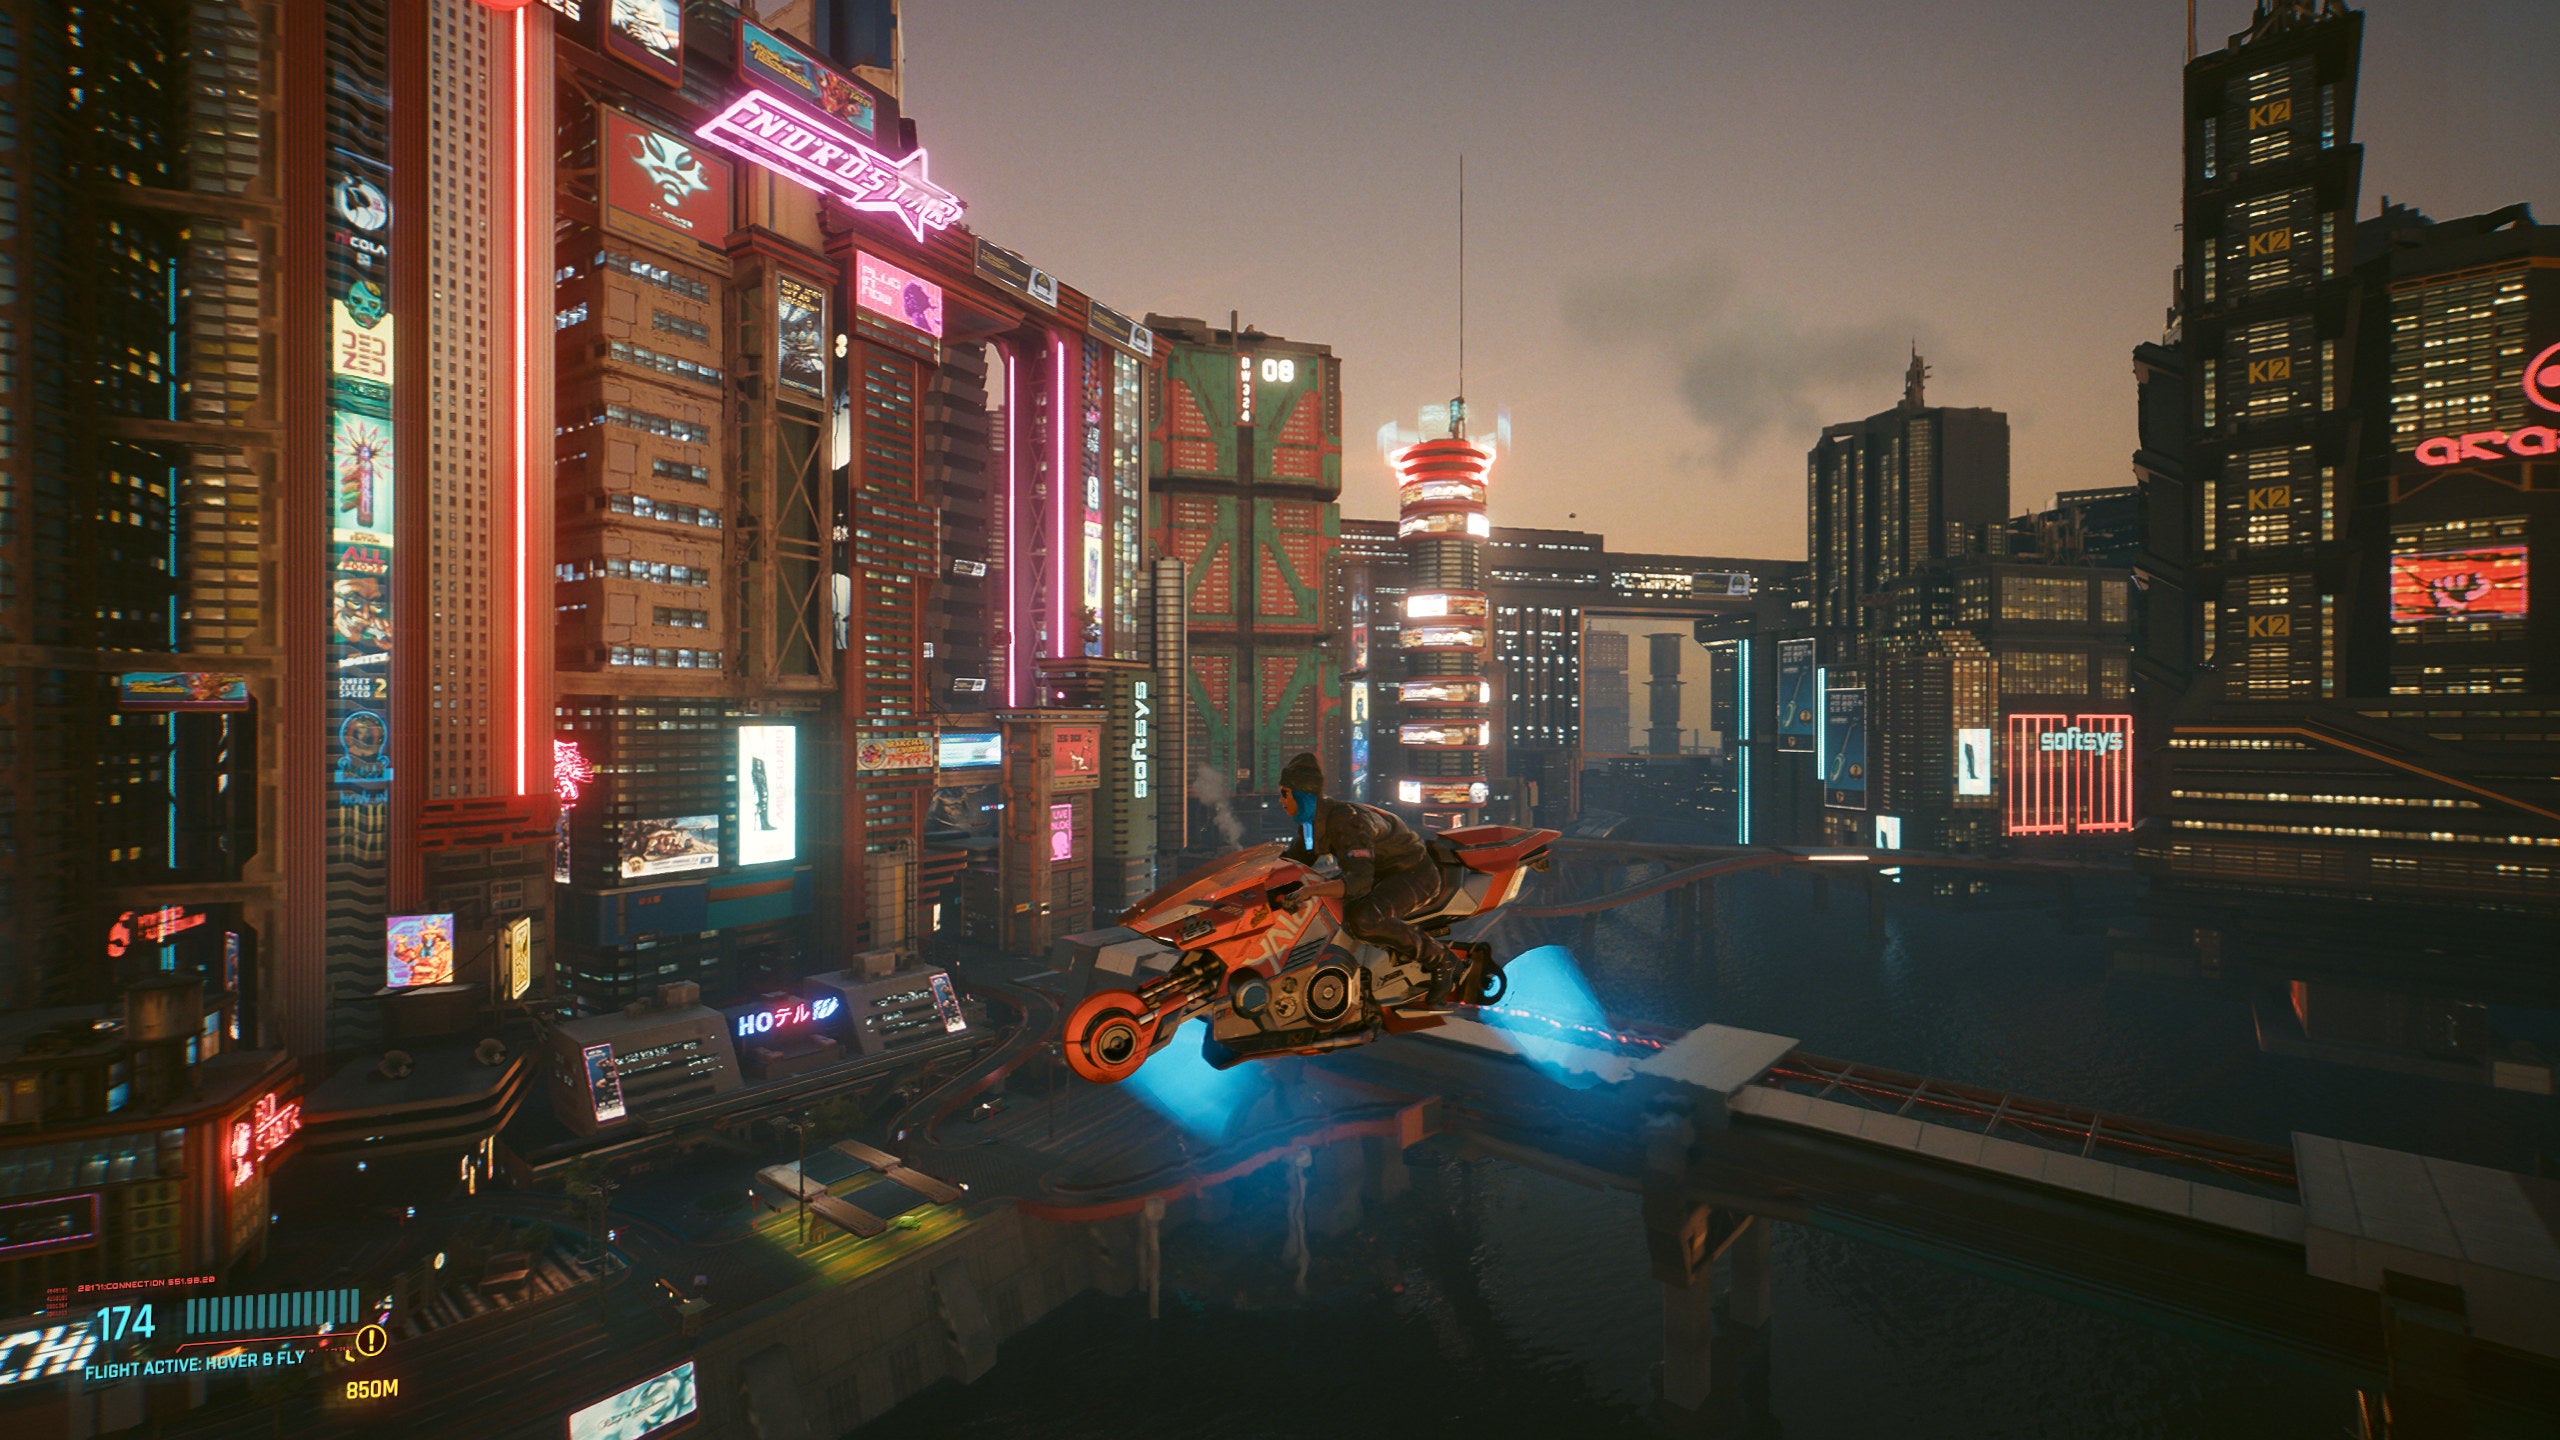 Flying a hoverbike in Cyberpunk 2077 using a mod, Let There Be Flight mod.